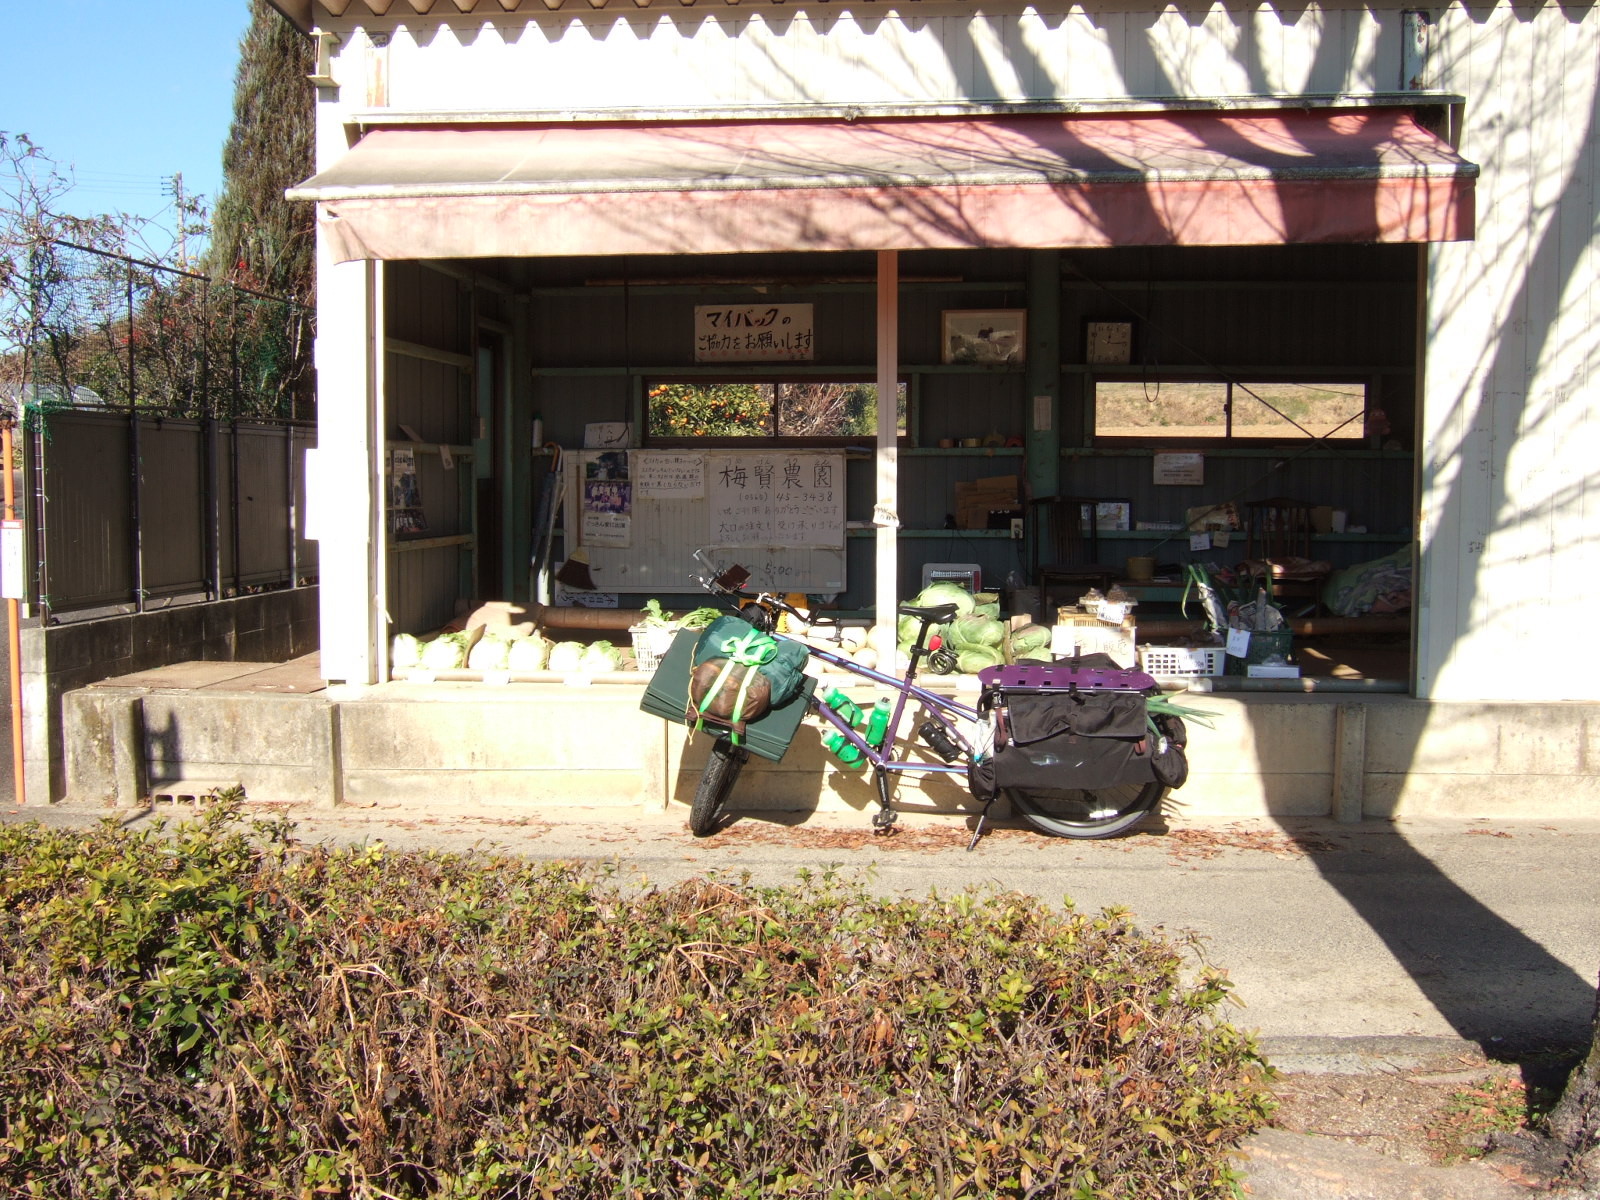 A loaded cargo bike parked in front of a vegetable stand. The greens of a bundle of large long onions projects from the rear of the cargo bike’s saddle bags like a short horse’s tail.